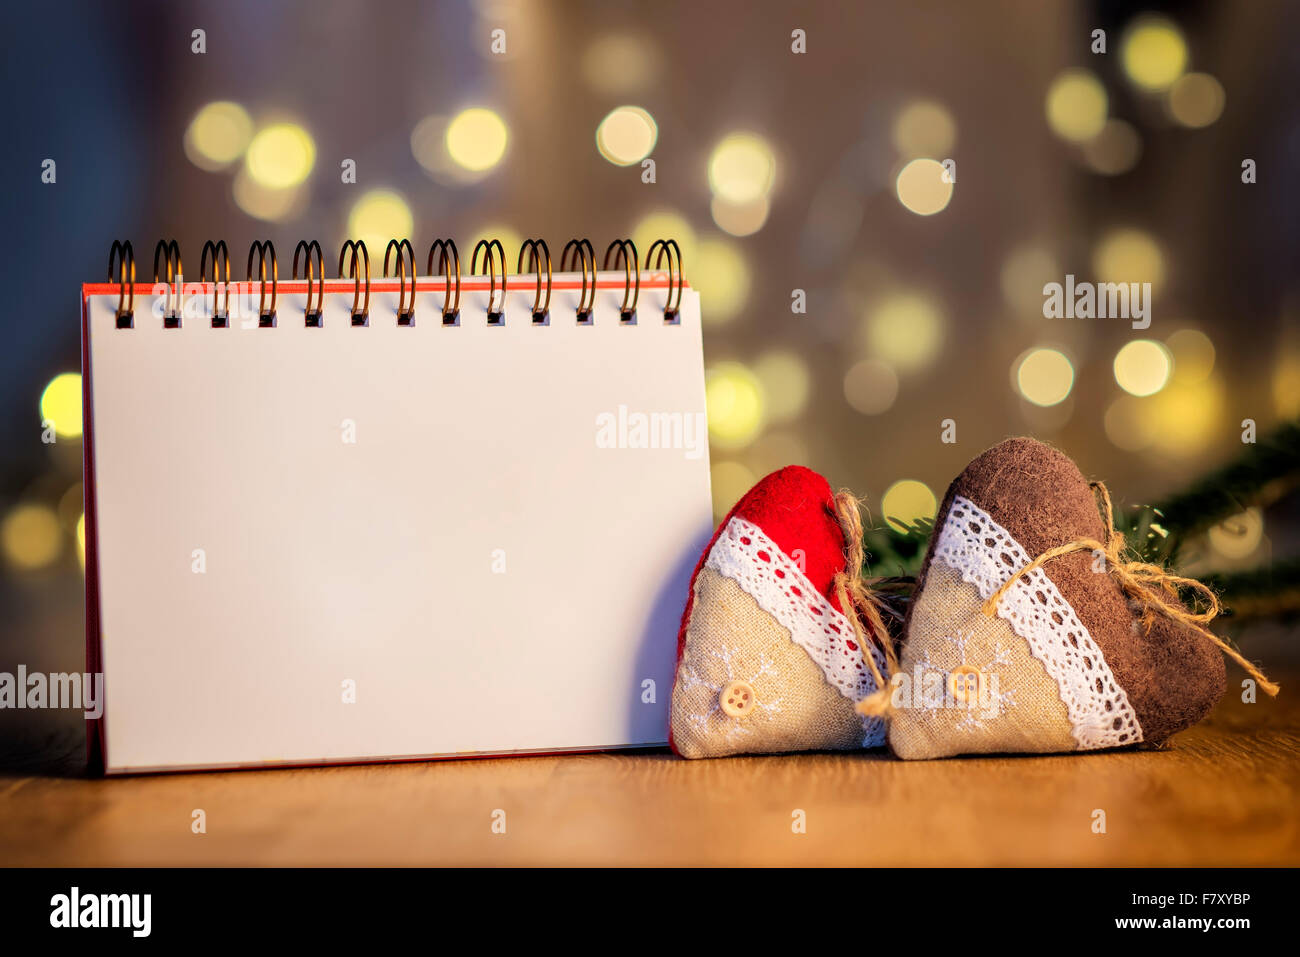 Image of empty ring binder with free space, decoration hearts and blur lights in background Stock Photo